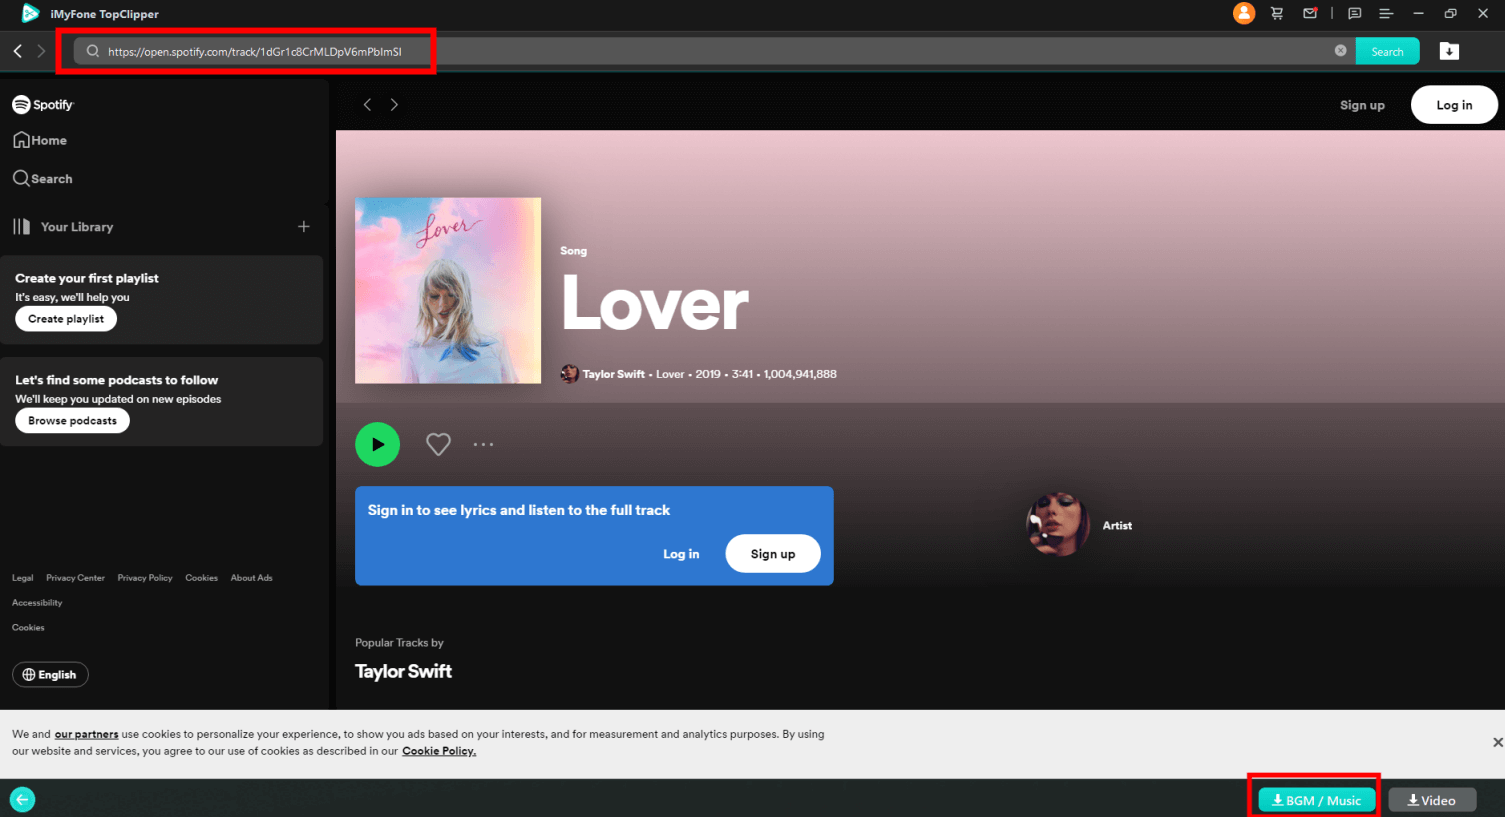 paste url spotify and search